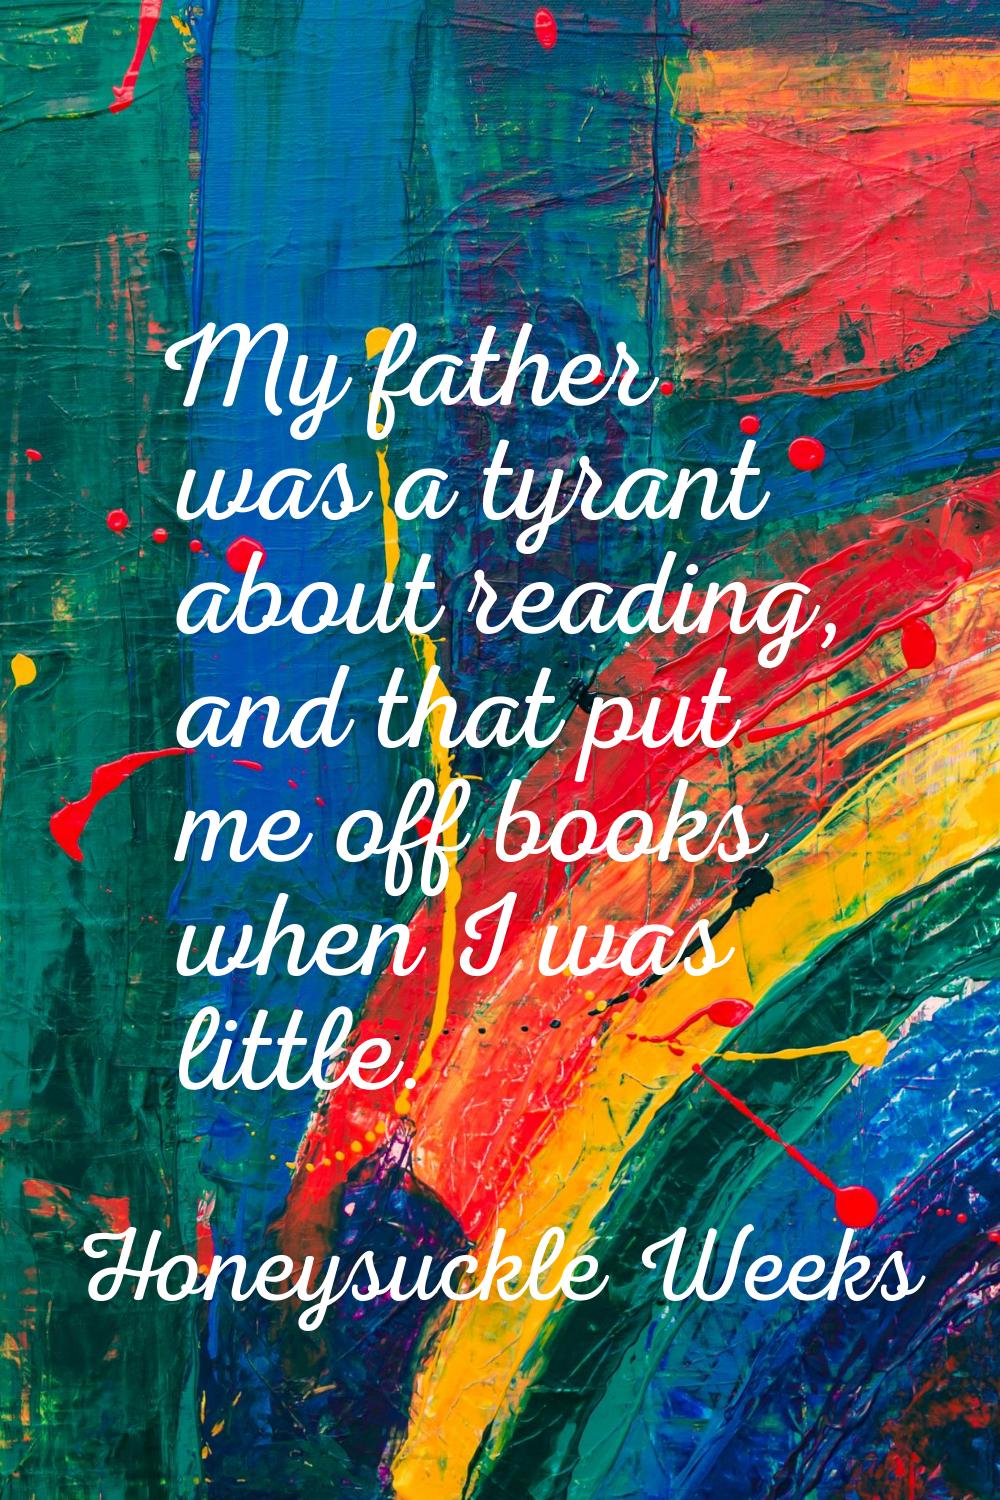 My father was a tyrant about reading, and that put me off books when I was little.